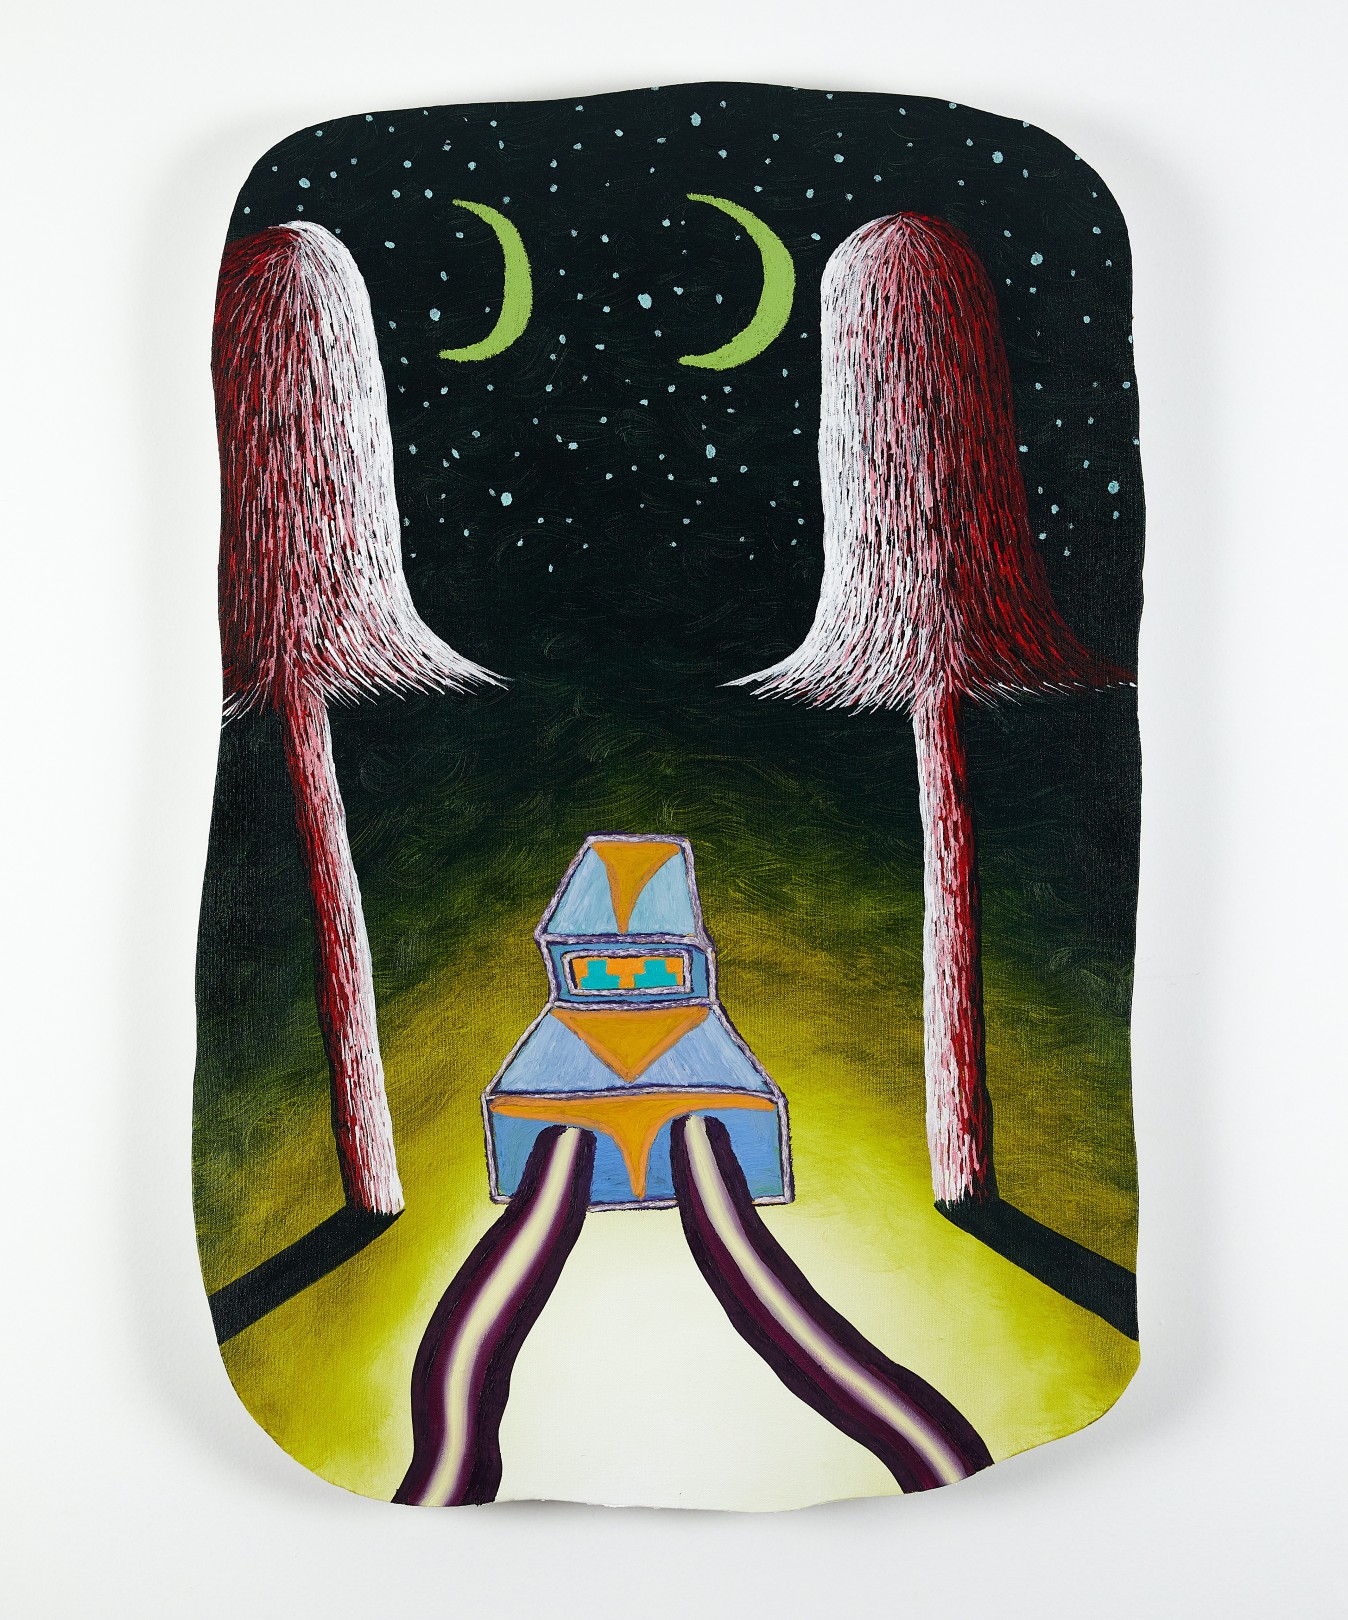 Night Car (Vague Distinction 9), 2021 Oil stick and acrylic on canvas approx. 89 x 61 x 5 cm. / 35 x 24 x 2 in.